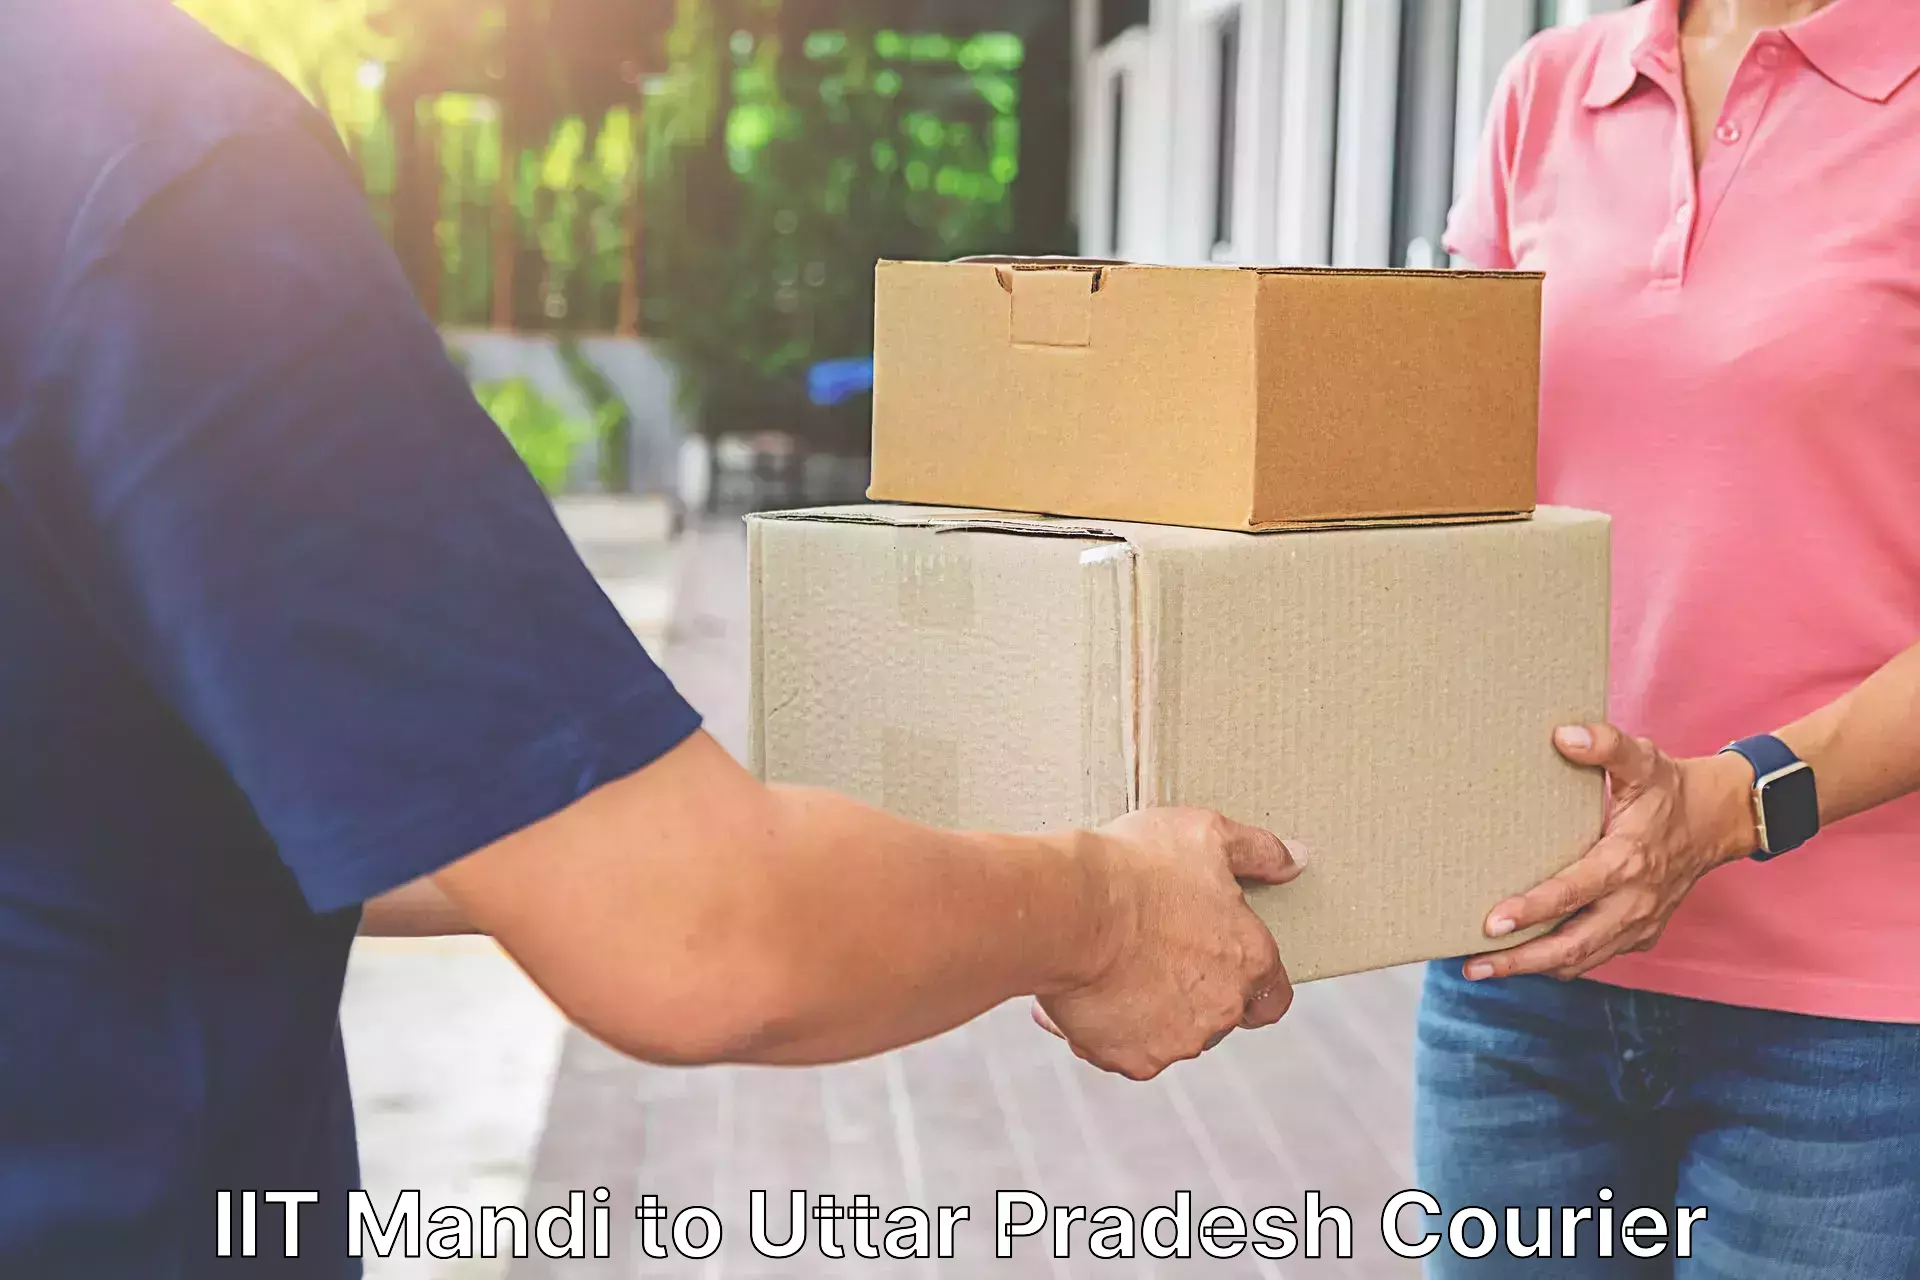 End-to-end delivery IIT Mandi to Badlapur